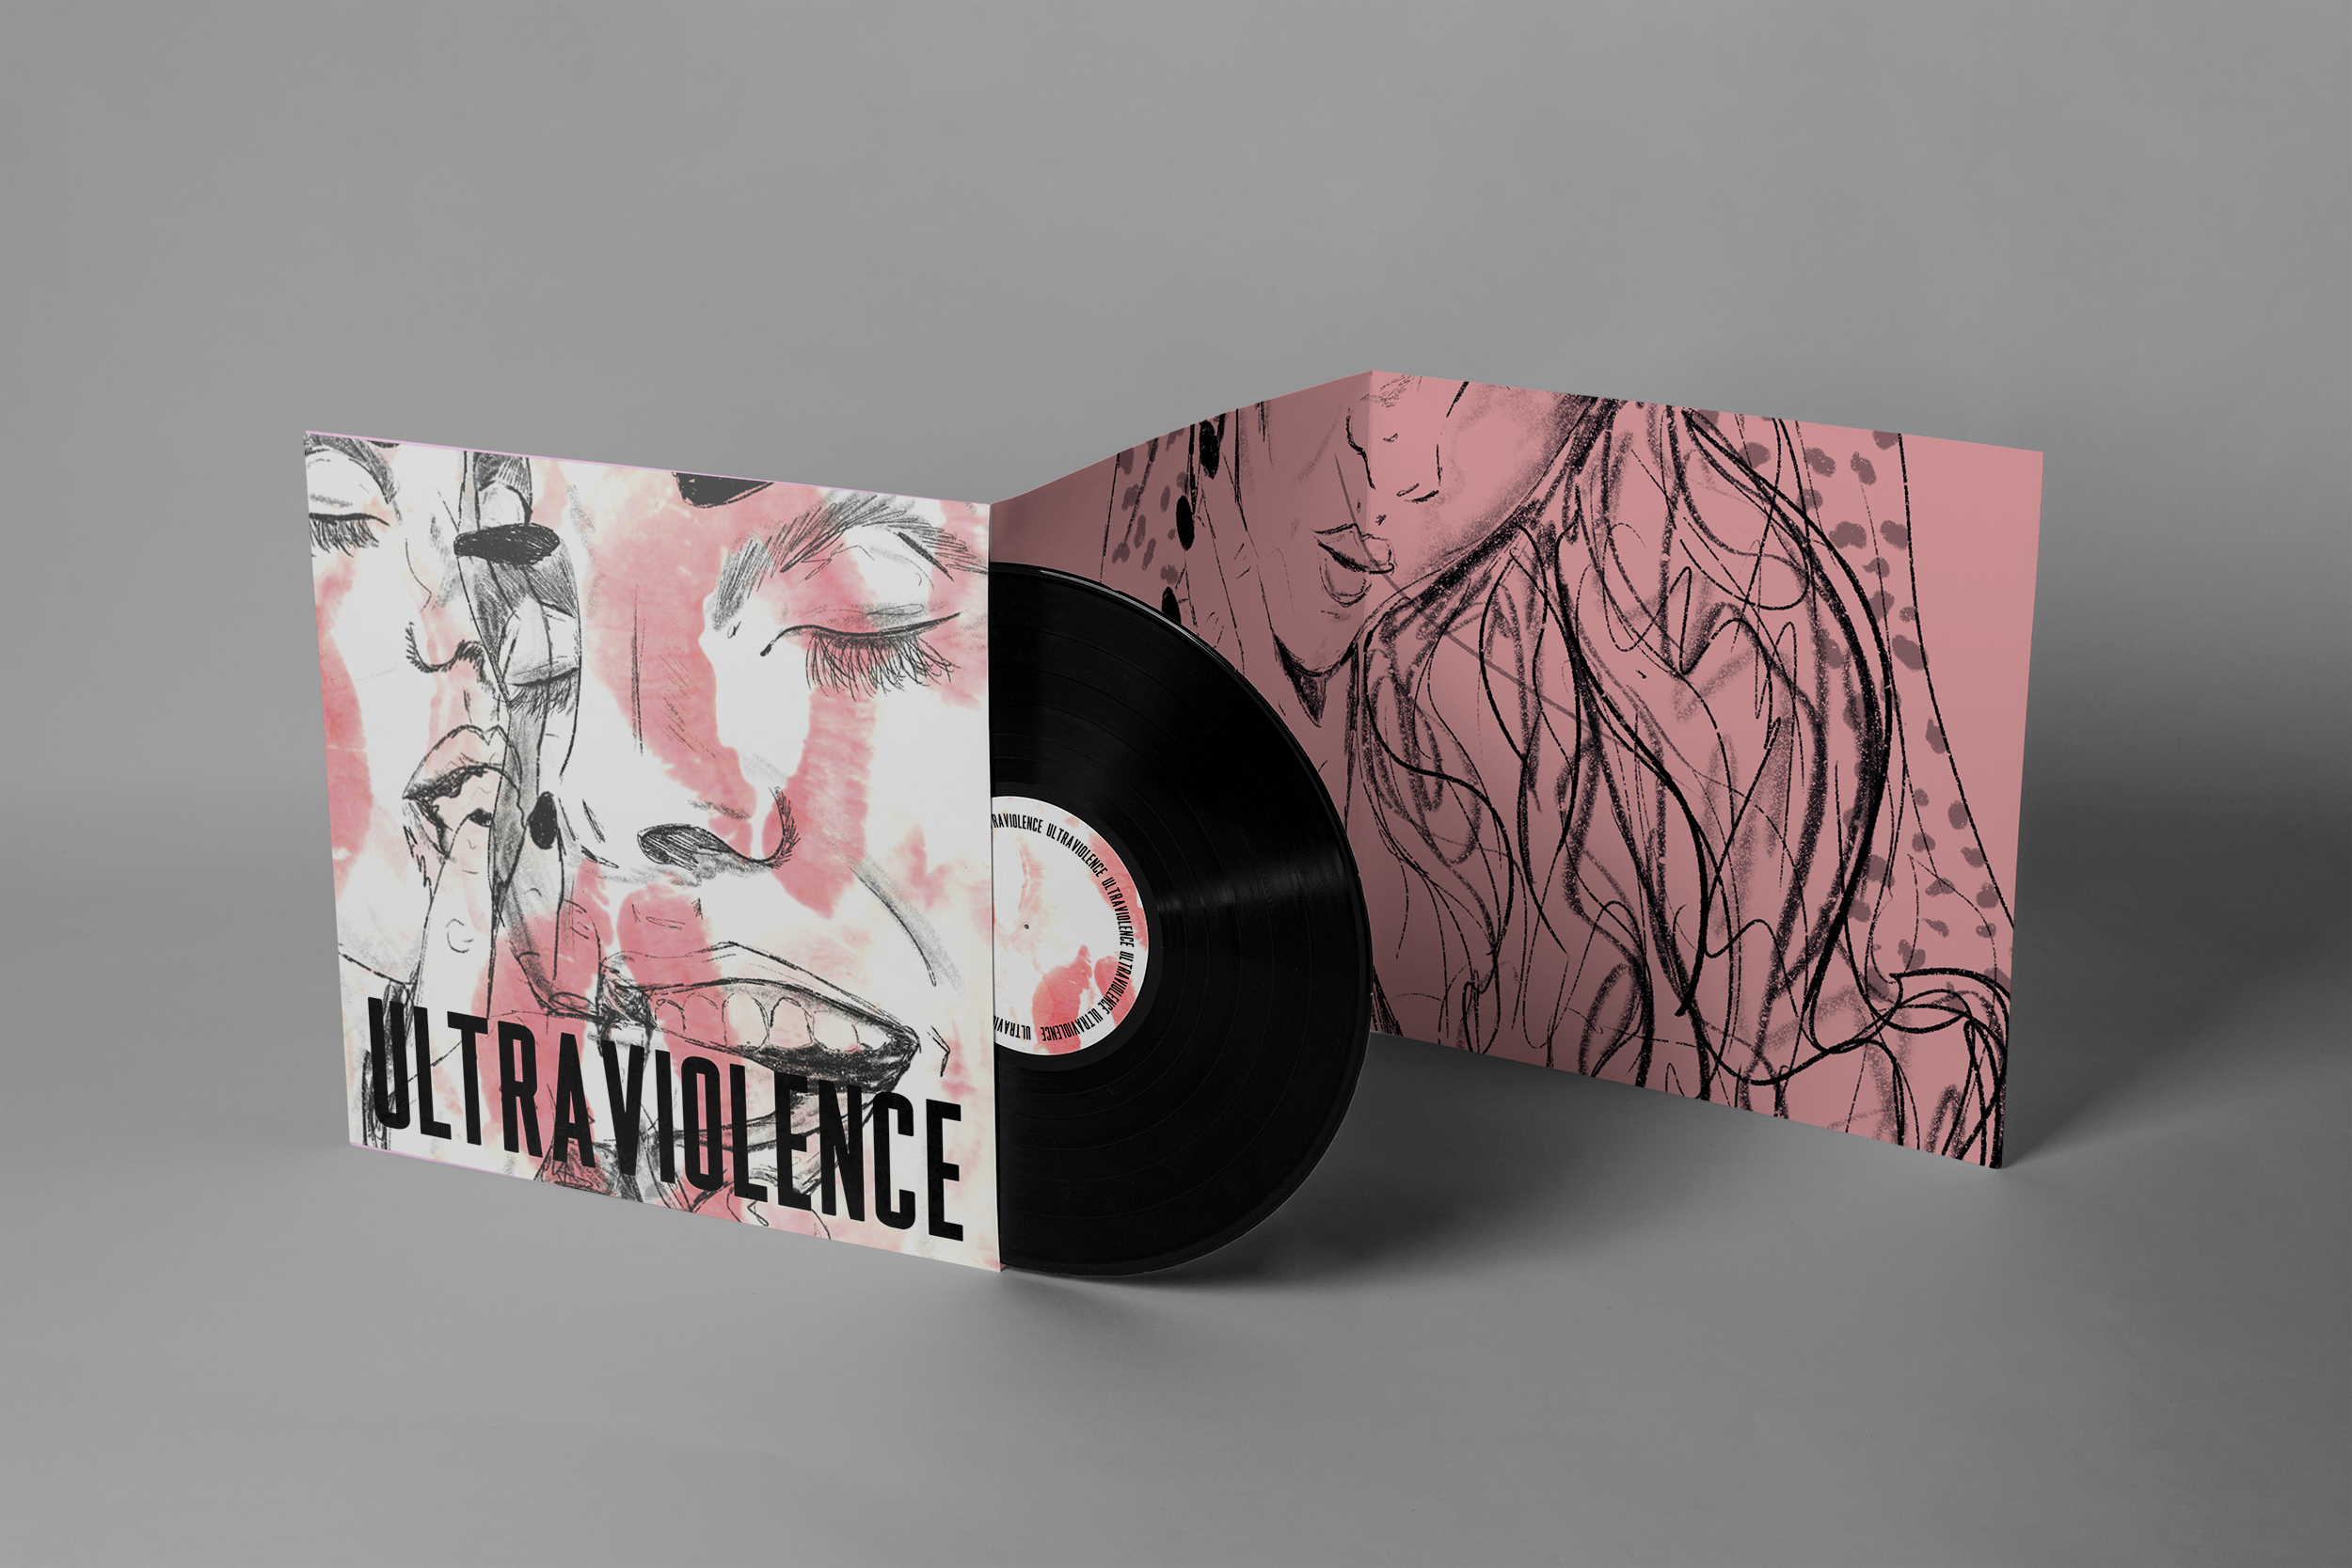 Illustrated and typographic vinyl redesign by Caitlin Jennings of the Ultraviolence album (Lana Del Rey).